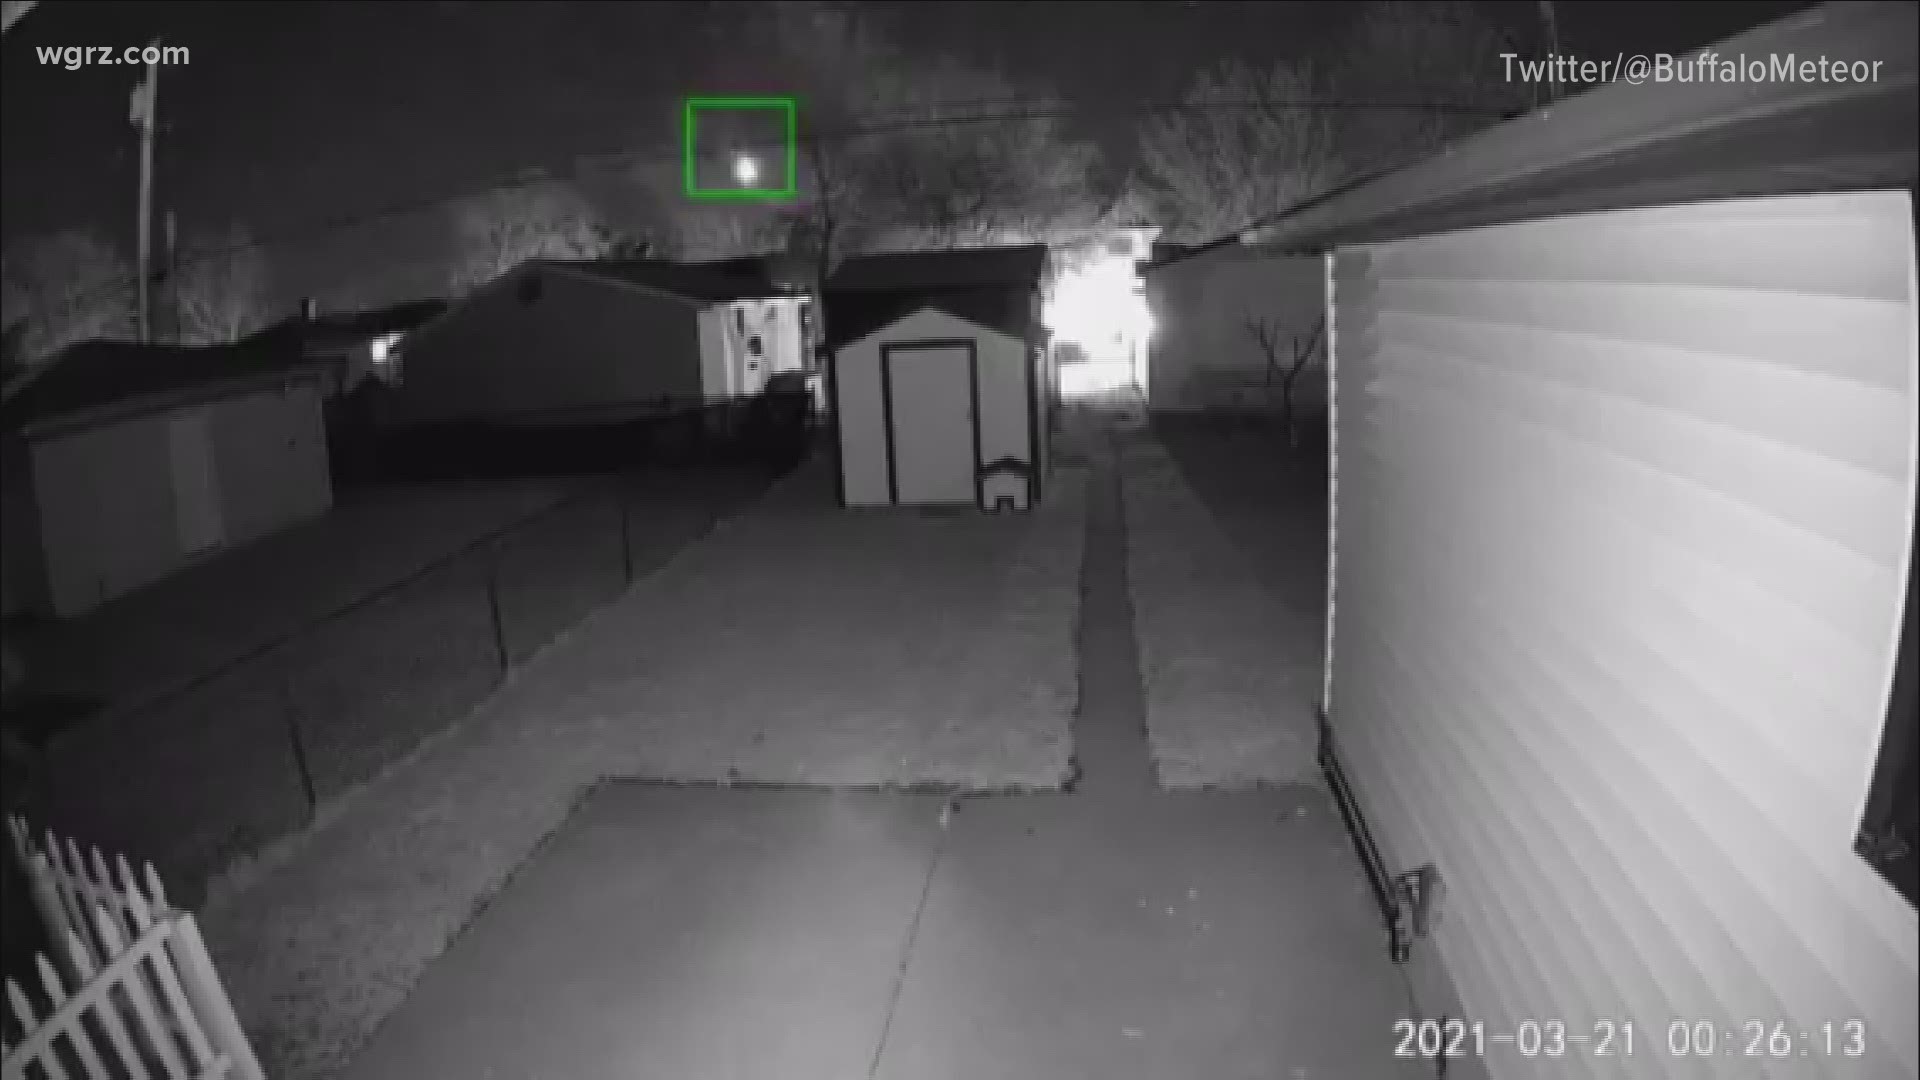 A reported meteor lit up the sky across the east coast this morning just after midnight. This video is from Julie, in Cheektowaga, who caught the streak of light.